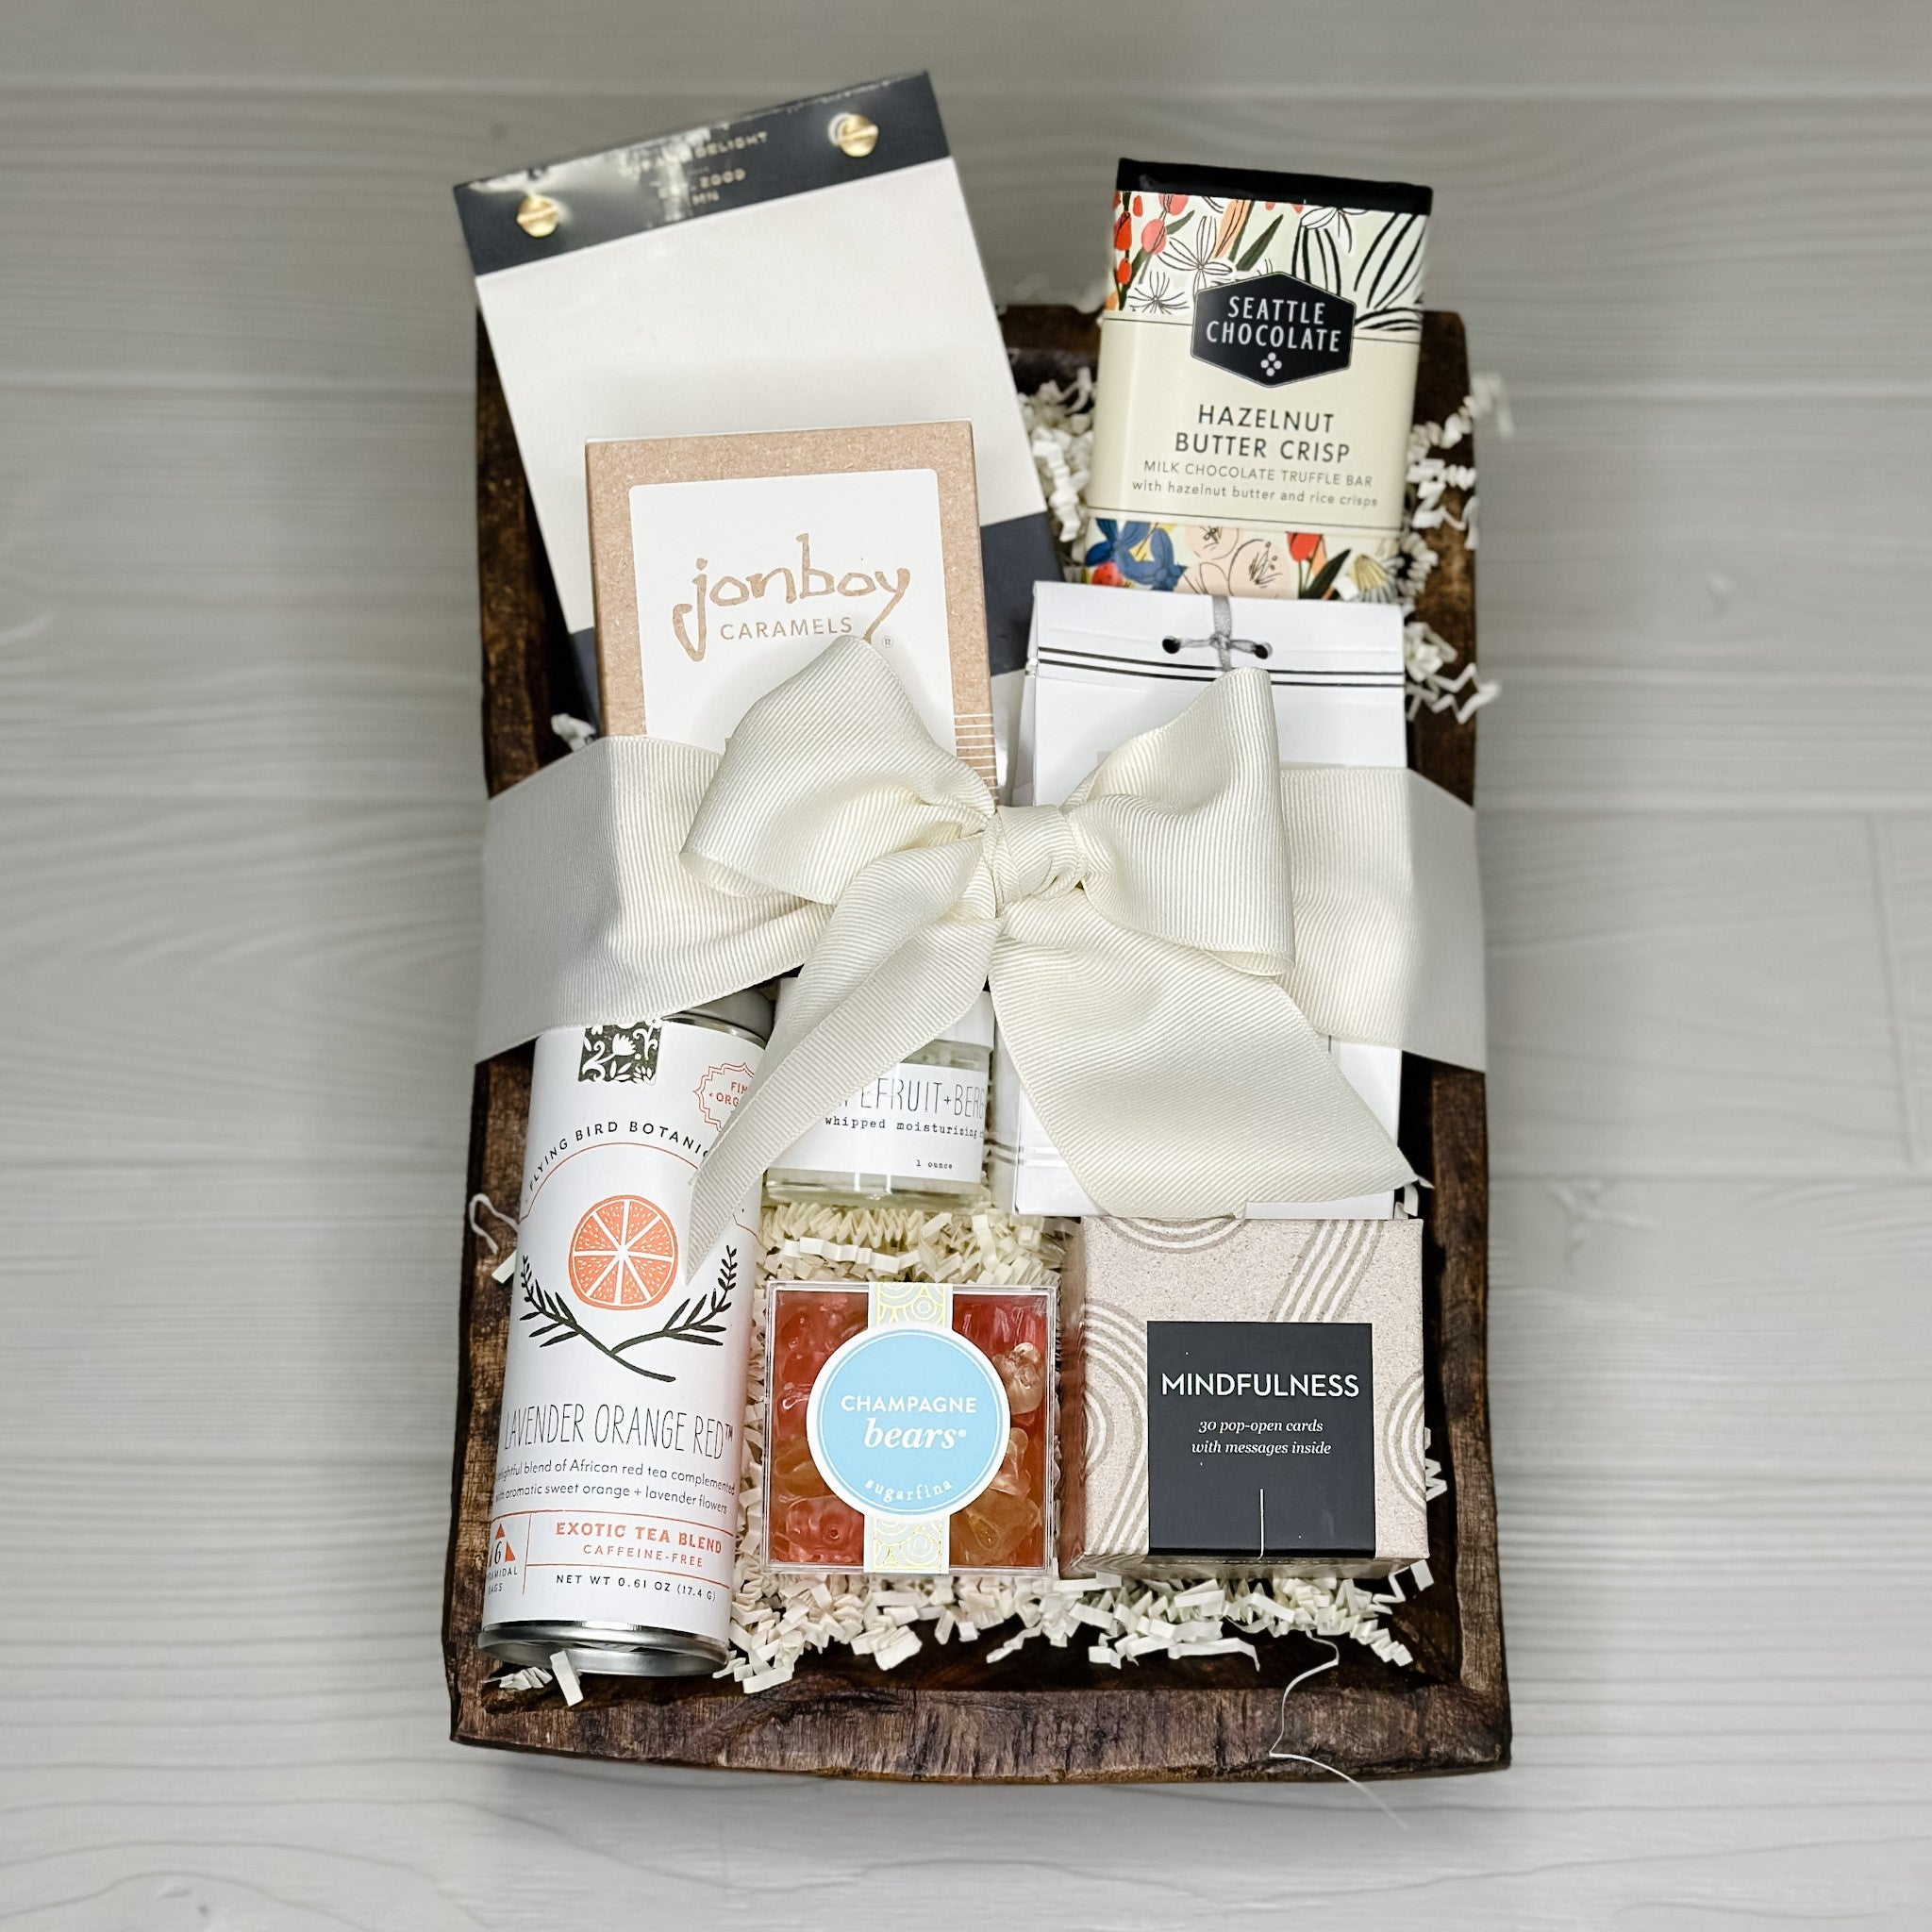 A wellness gift basket that includes organic tea, Sugarfina gummy bears, Inspirational quotes, bath salts, hand cream, caramel, chocolate, and a notepad all packaged in a wooden bowl..